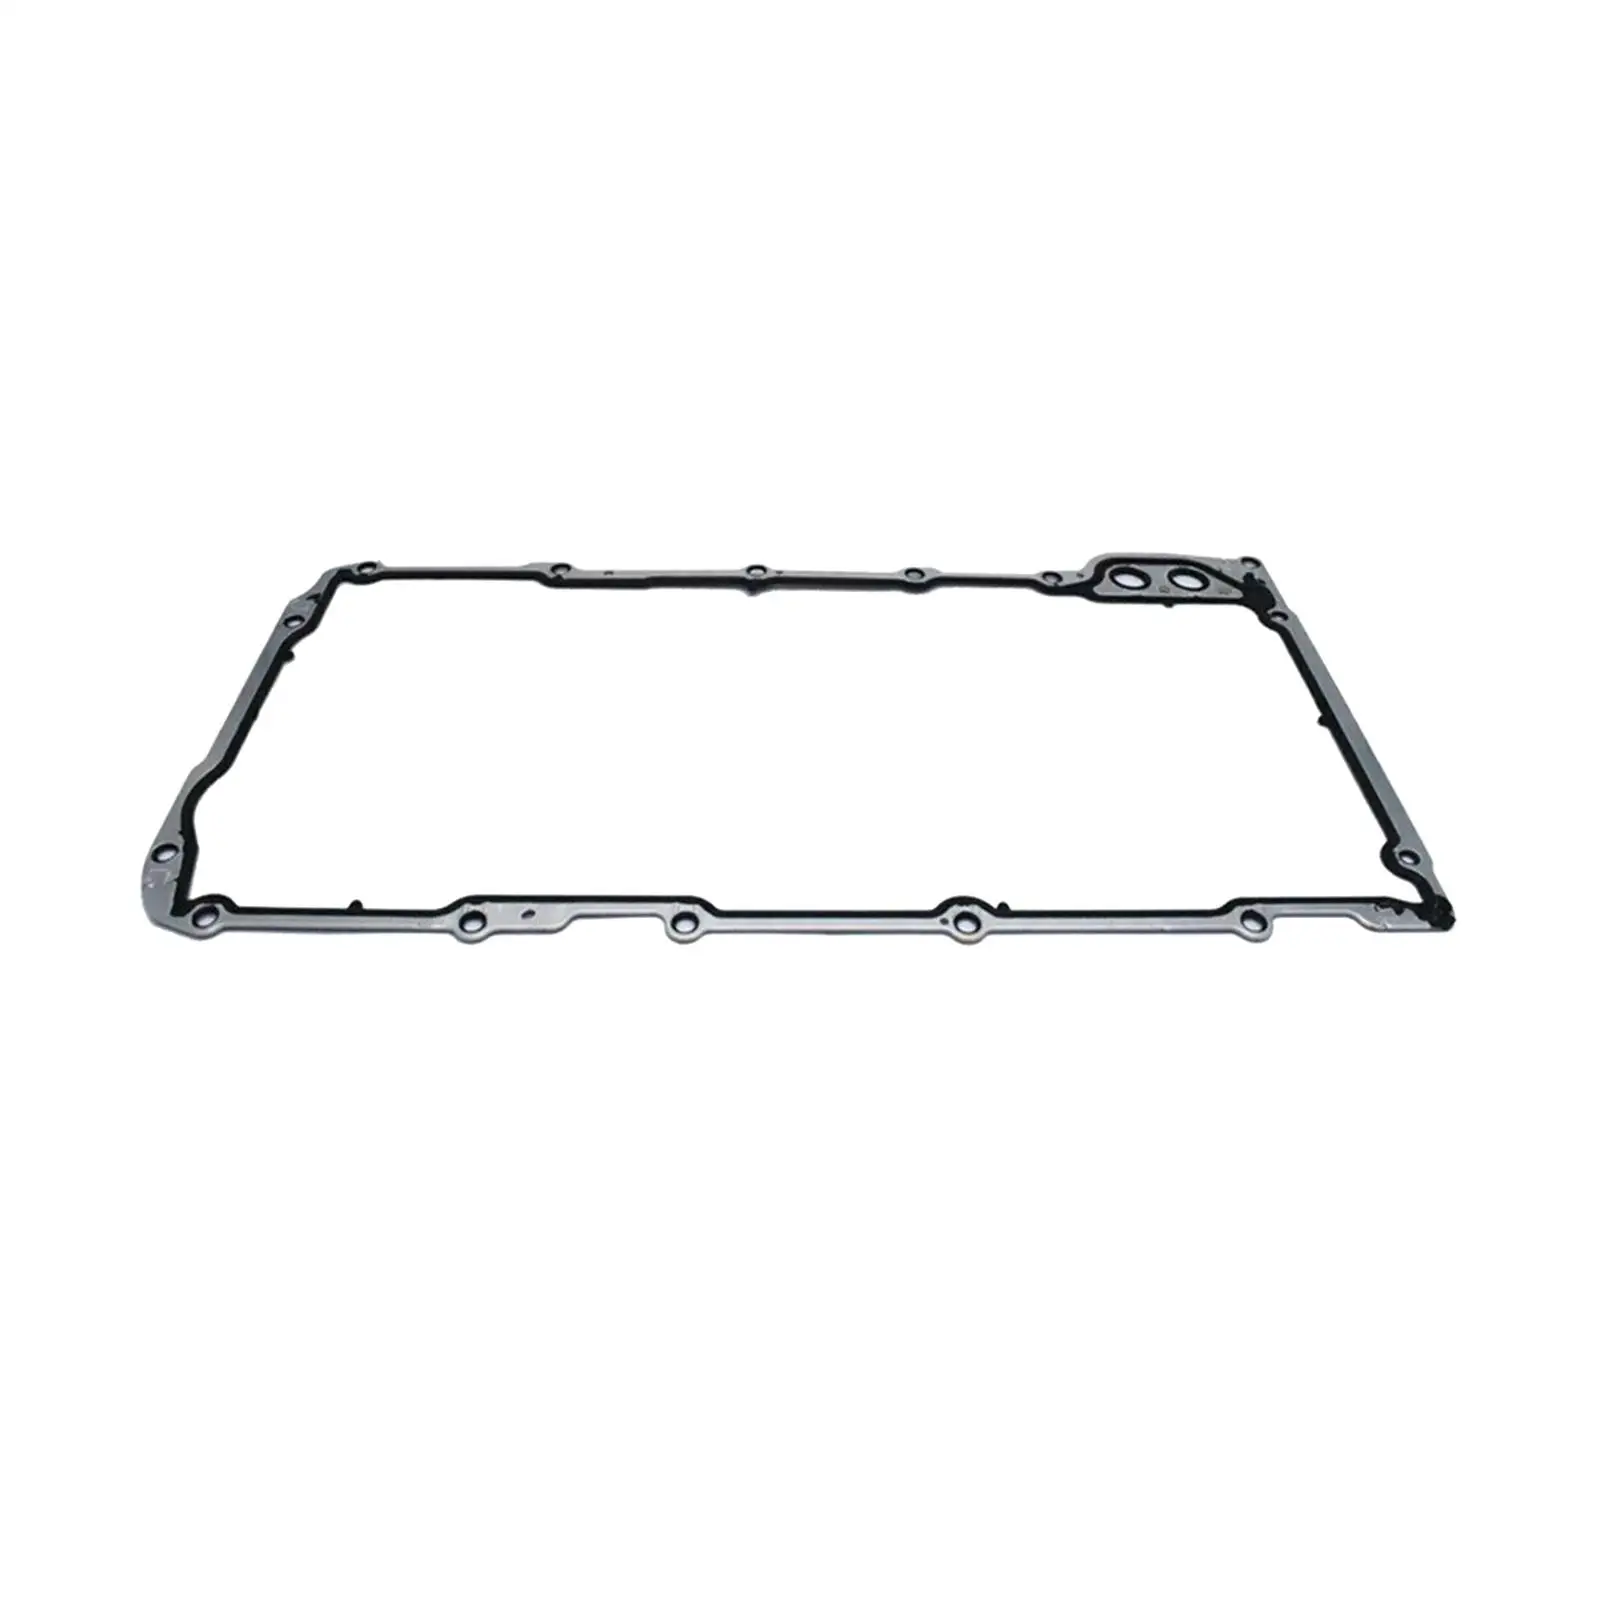 Oil Pan Gasket OS32241 12612350 for Hummer Replacement Car Accessories